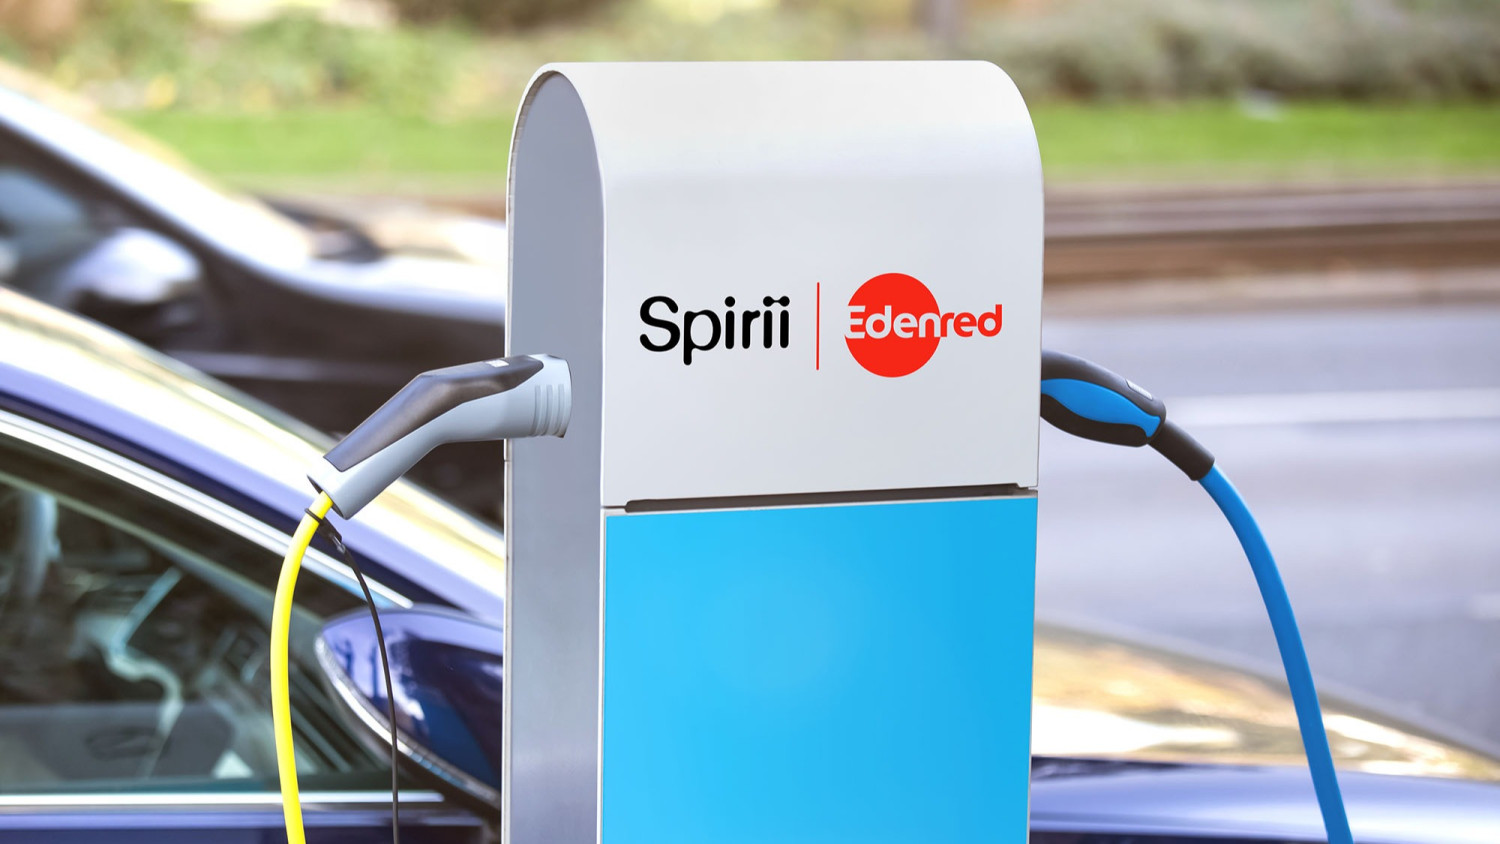 Denmark-based Spirii has around 100 employees and is expected to generate revenues of €25m to €30m in 2024